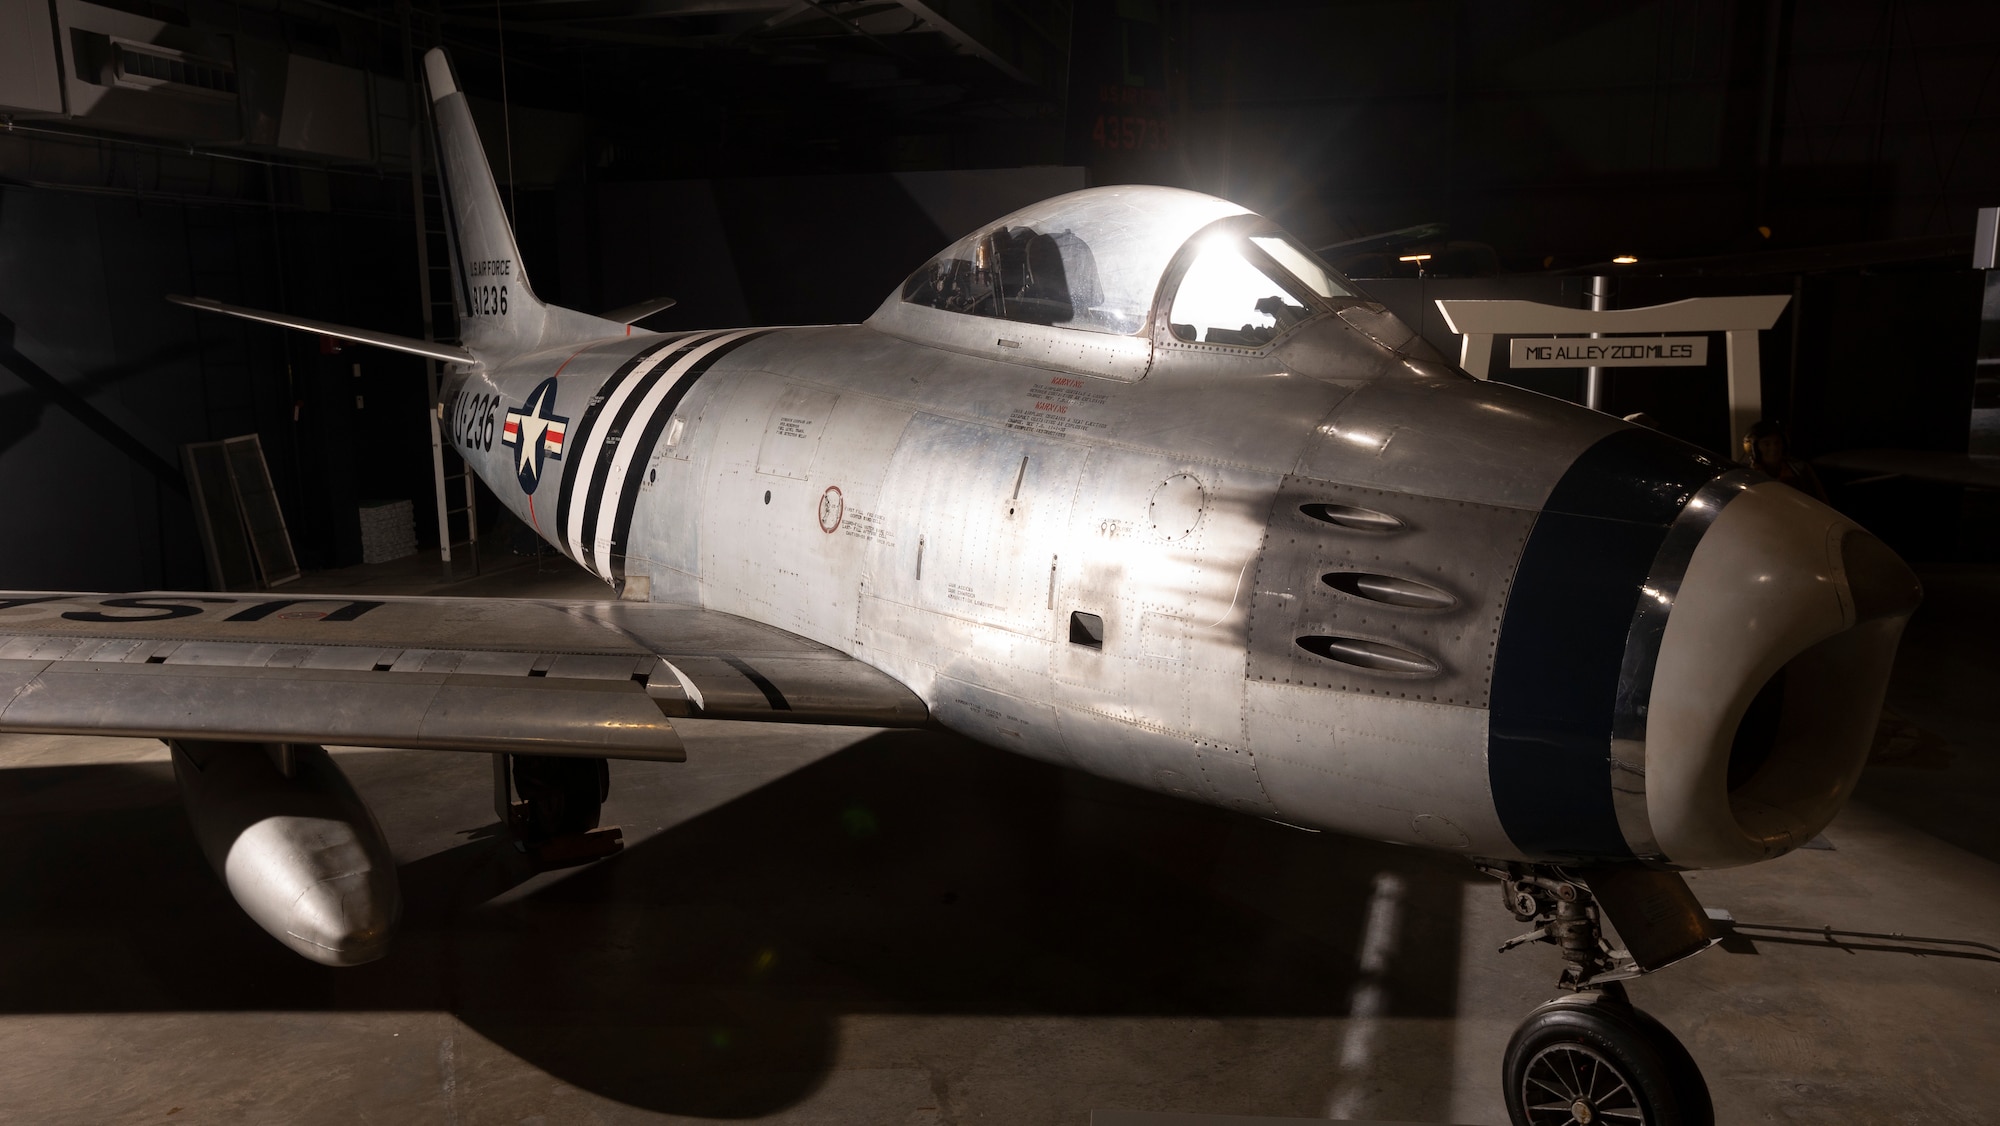 Exterior view of the North American F-86A Sabre